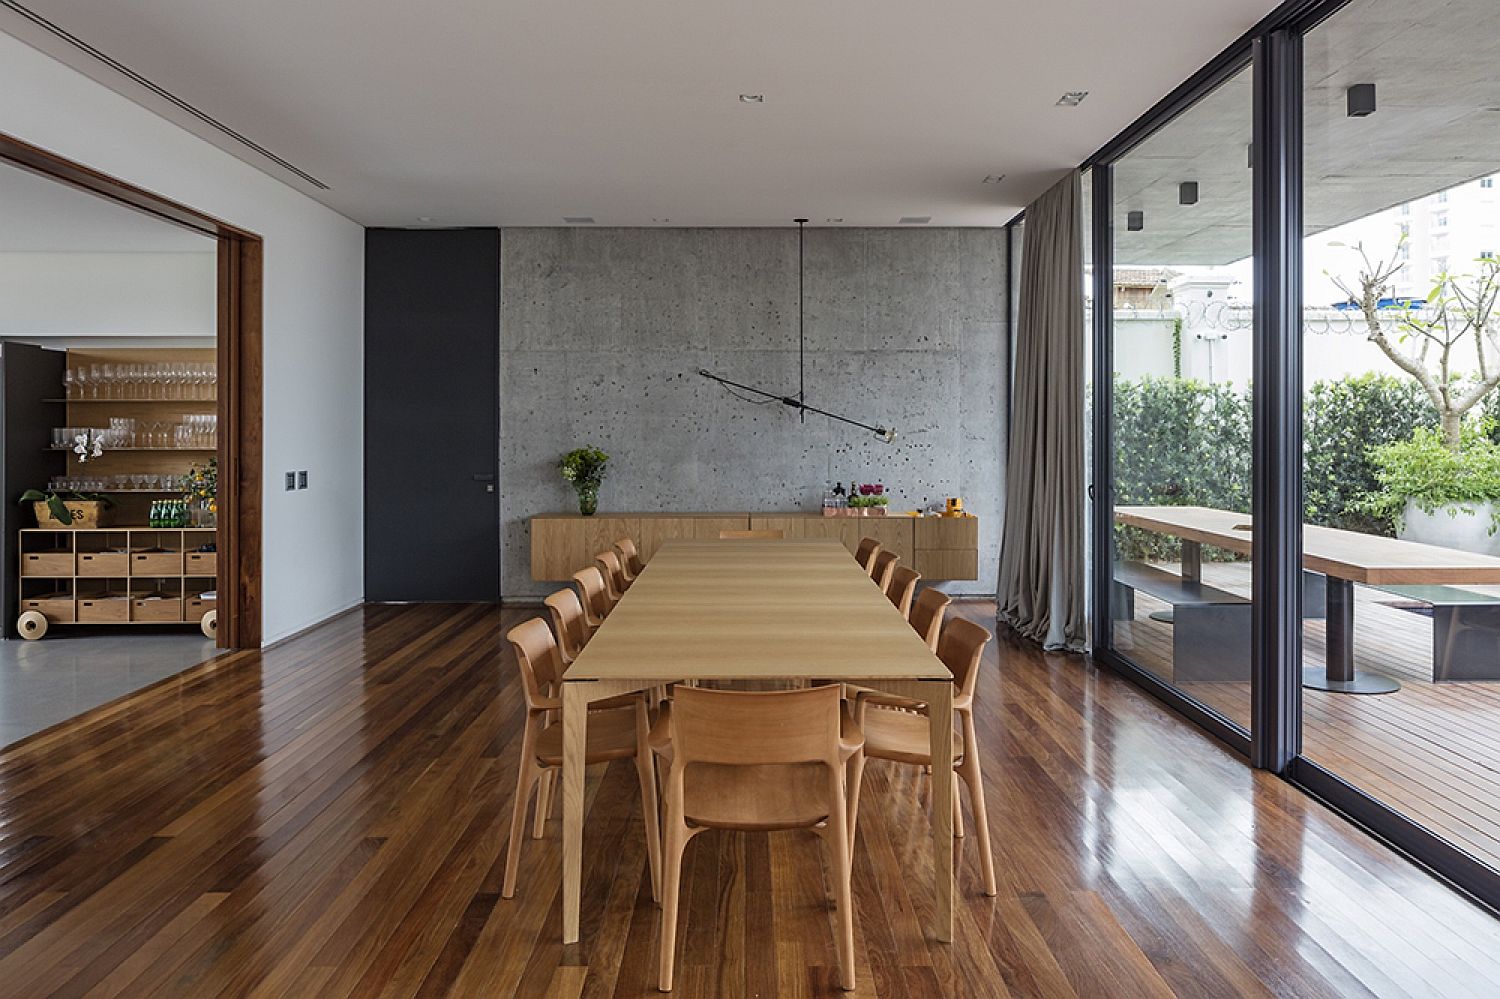 Spacious-dining-room-with-concrete-and-glass-walls-along-with-wooden-flooring